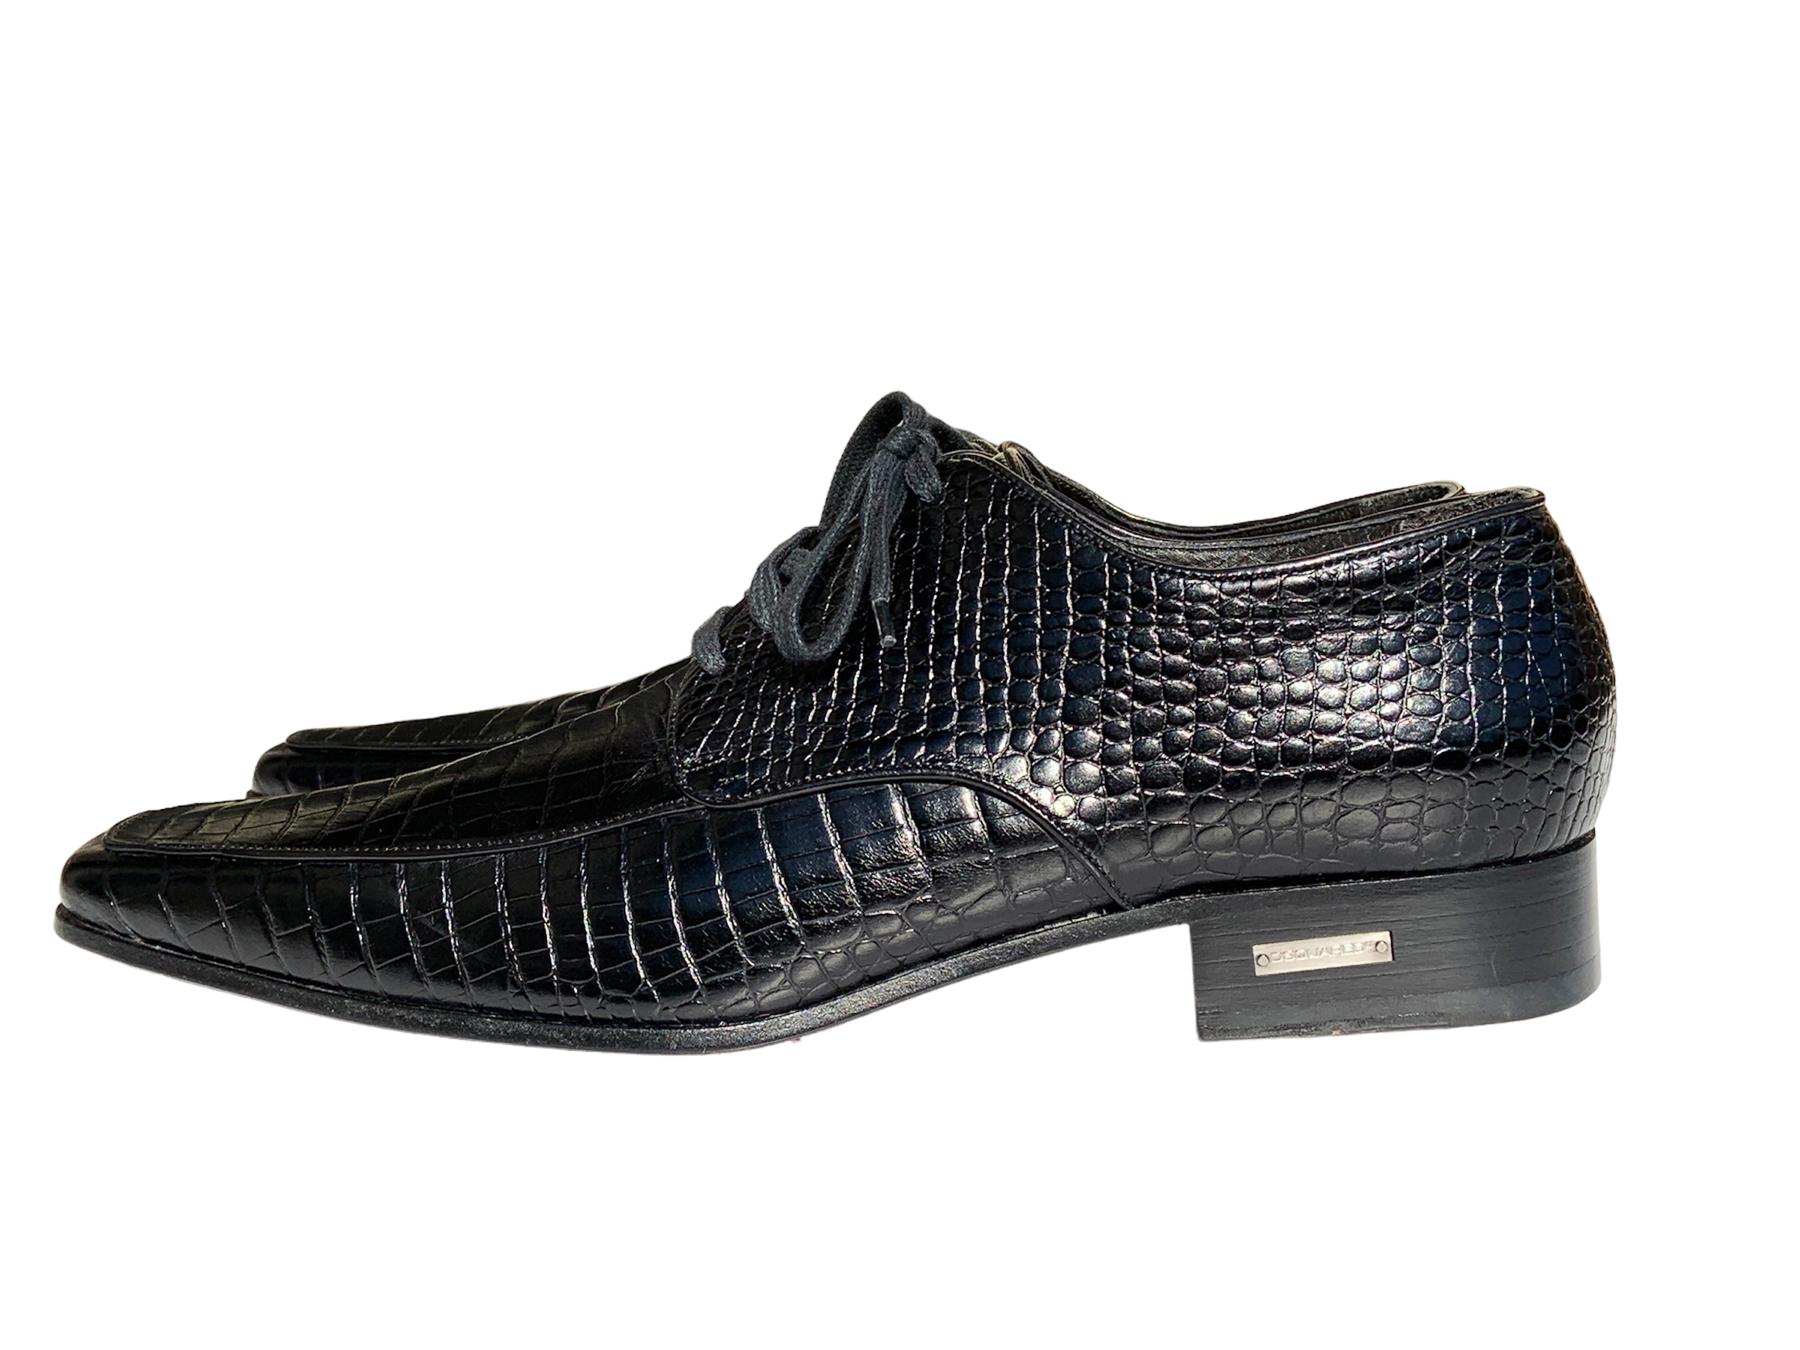 New Dsquared2 Black Crocodile Men's Lace Up Dress Shoes
Italian size - 43
Black Color, Lace Up Style, Leather Sole and Insole.
Made in Italy.
New with box.
Unfortunately do to restrictions this shoes can not be shipped overseas.